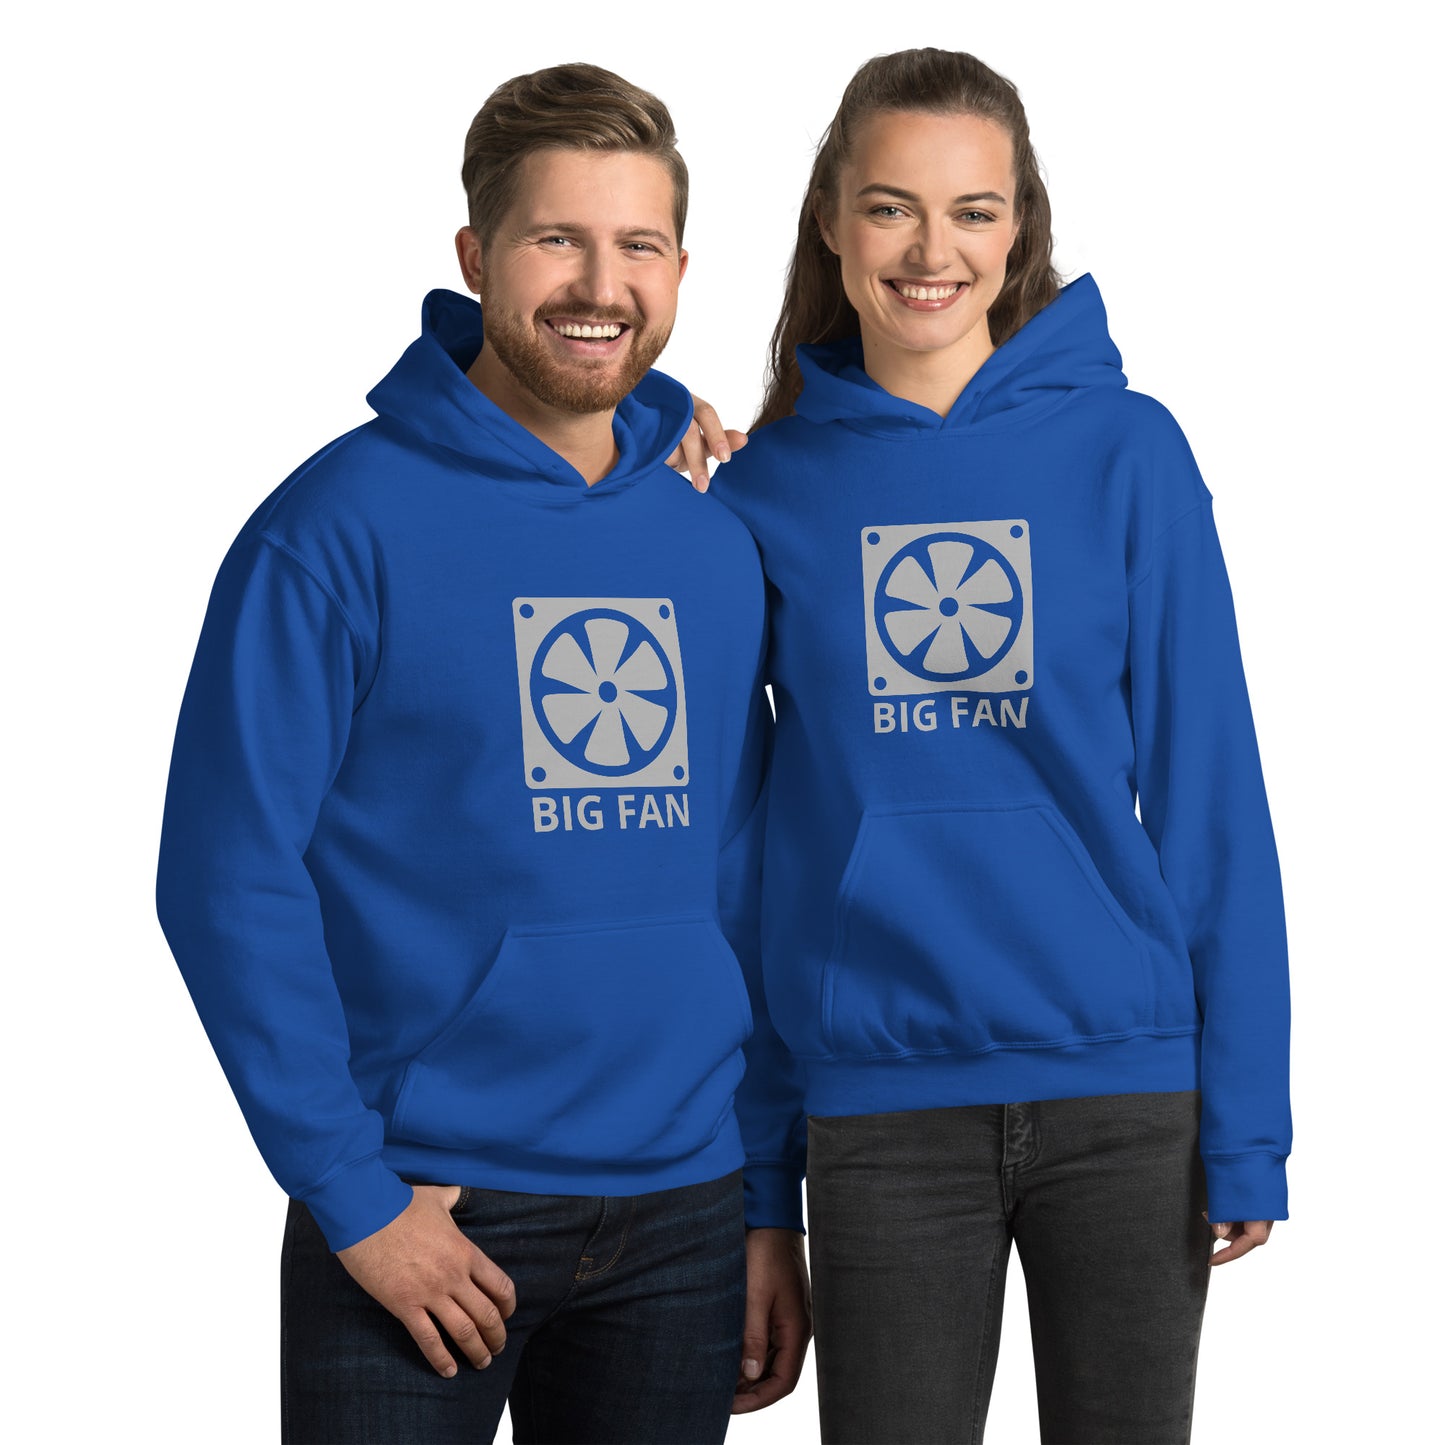 Man and women with royal blue hoodie with image of a big computer fan and the text "BIG FAN"